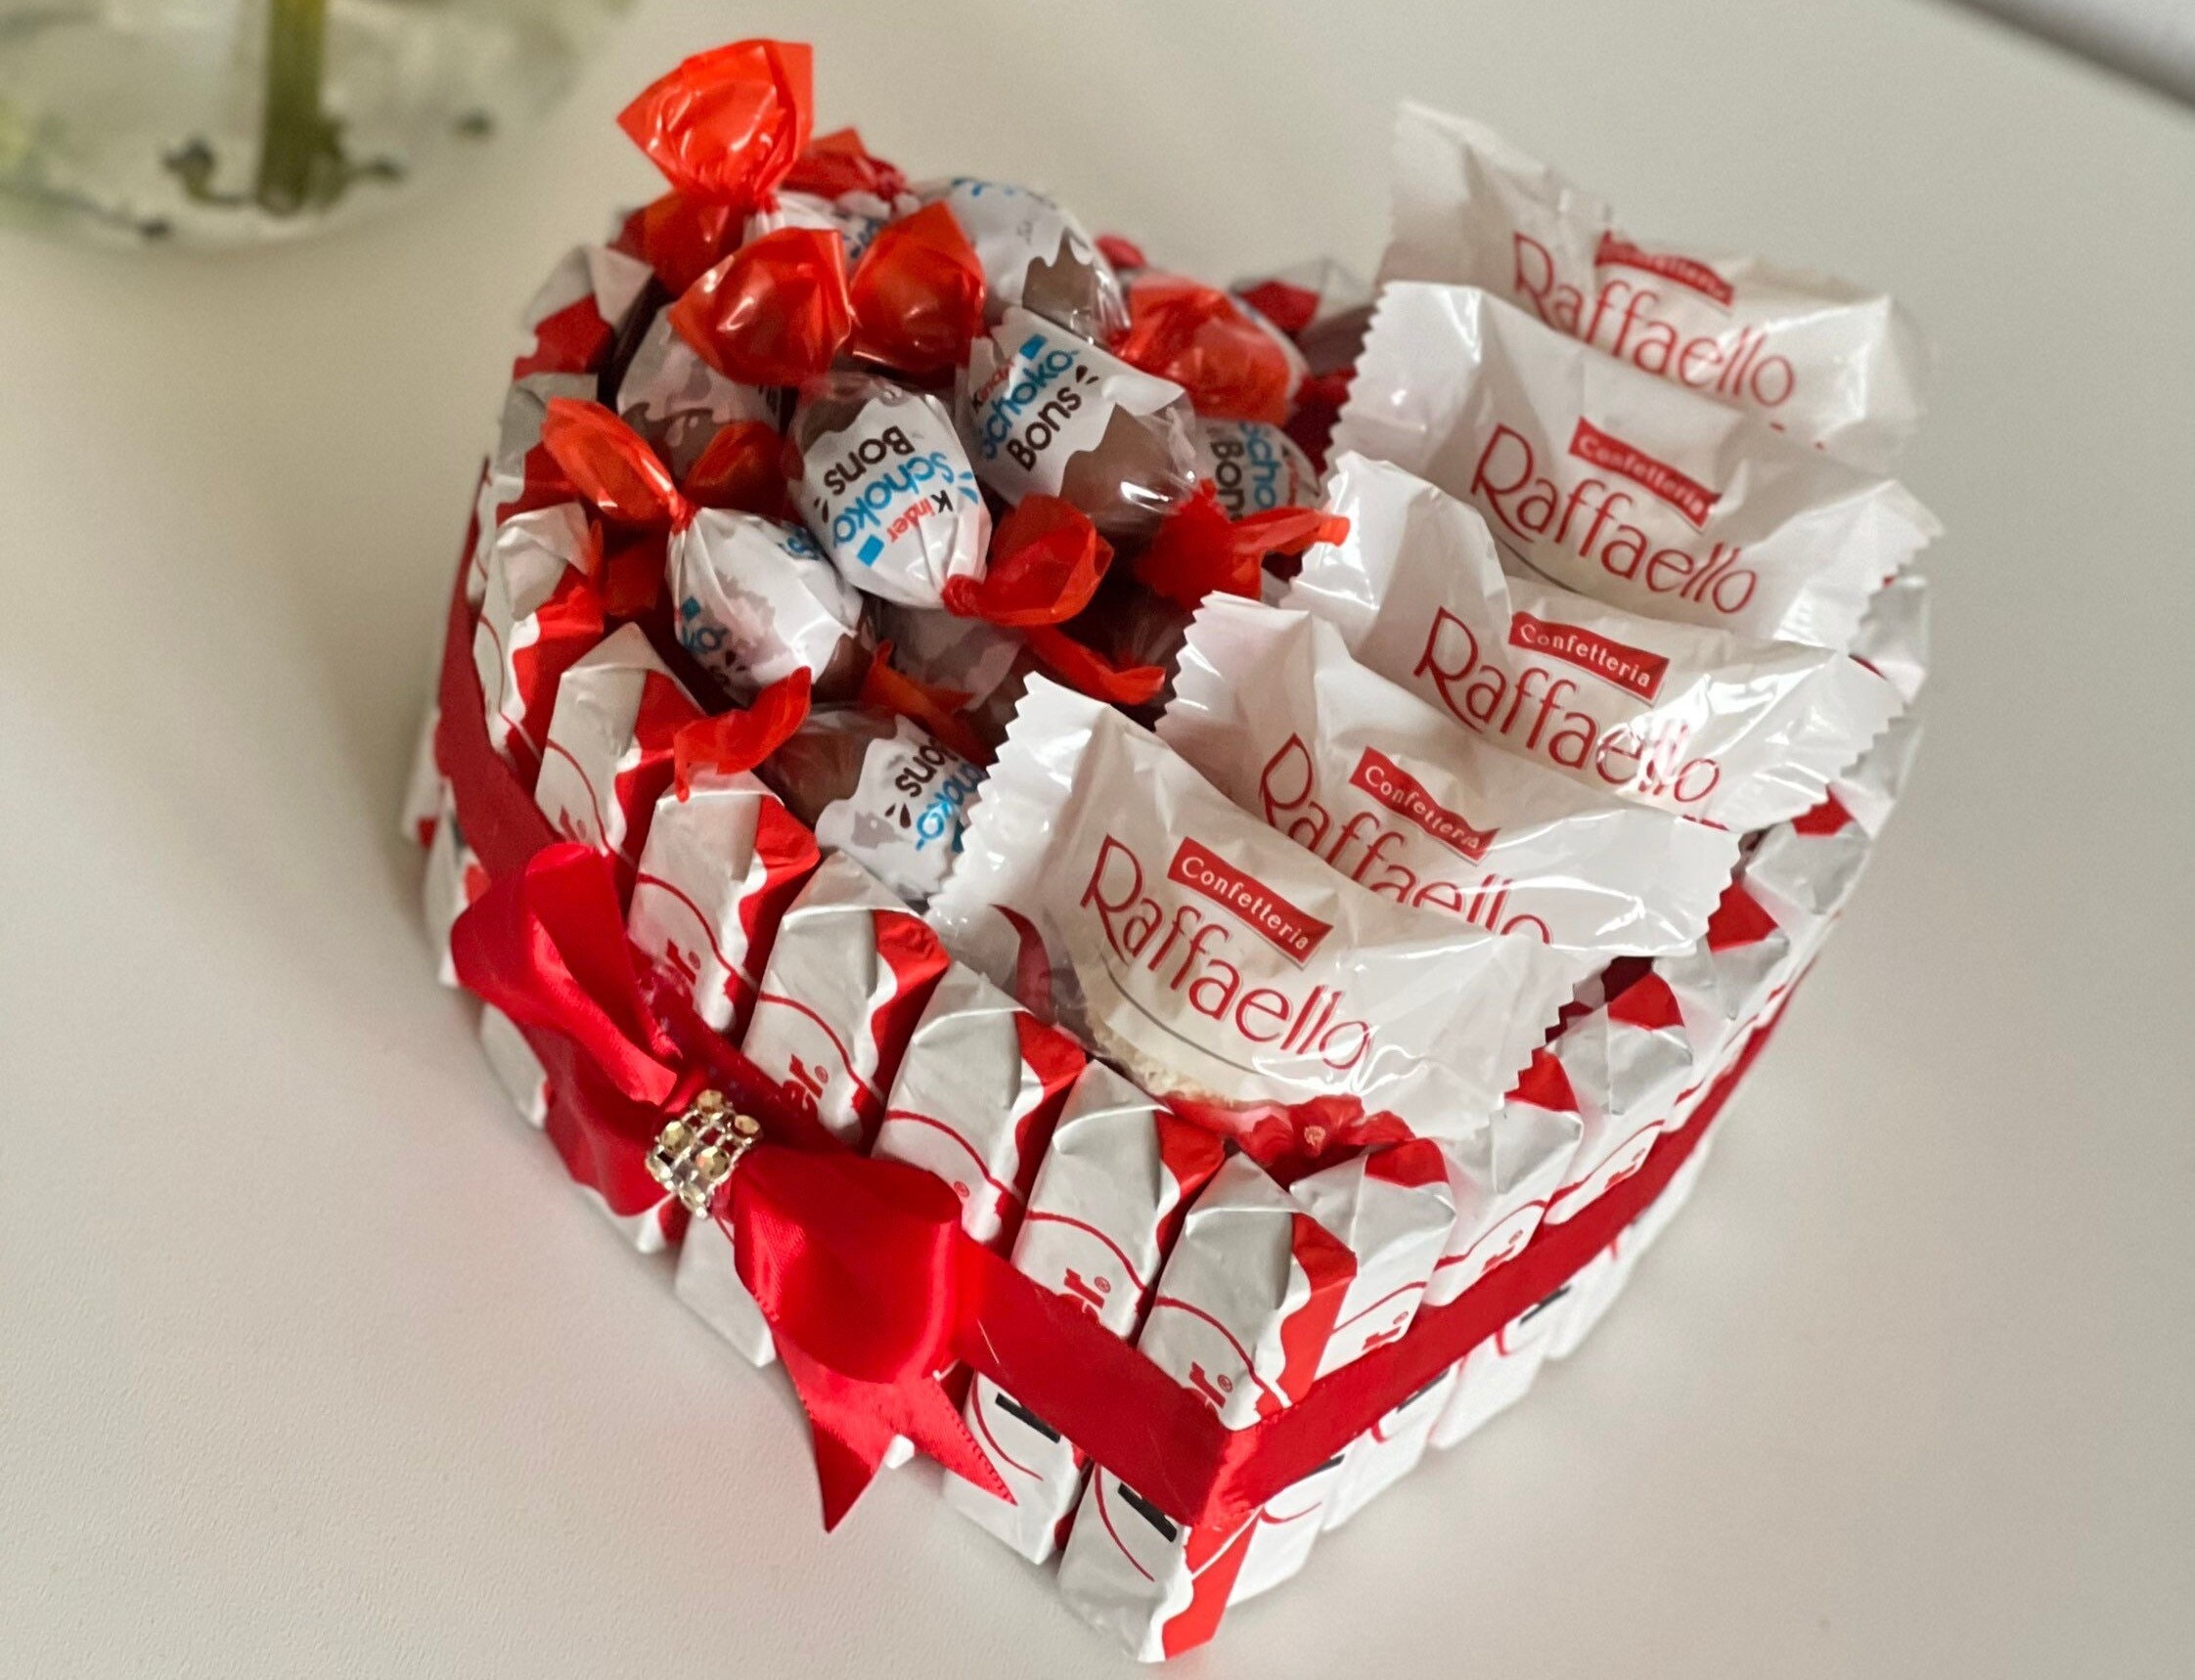 Raffaello Candy Box, Gifts Delivery in Ukraine. Prices, Photos, Reviews